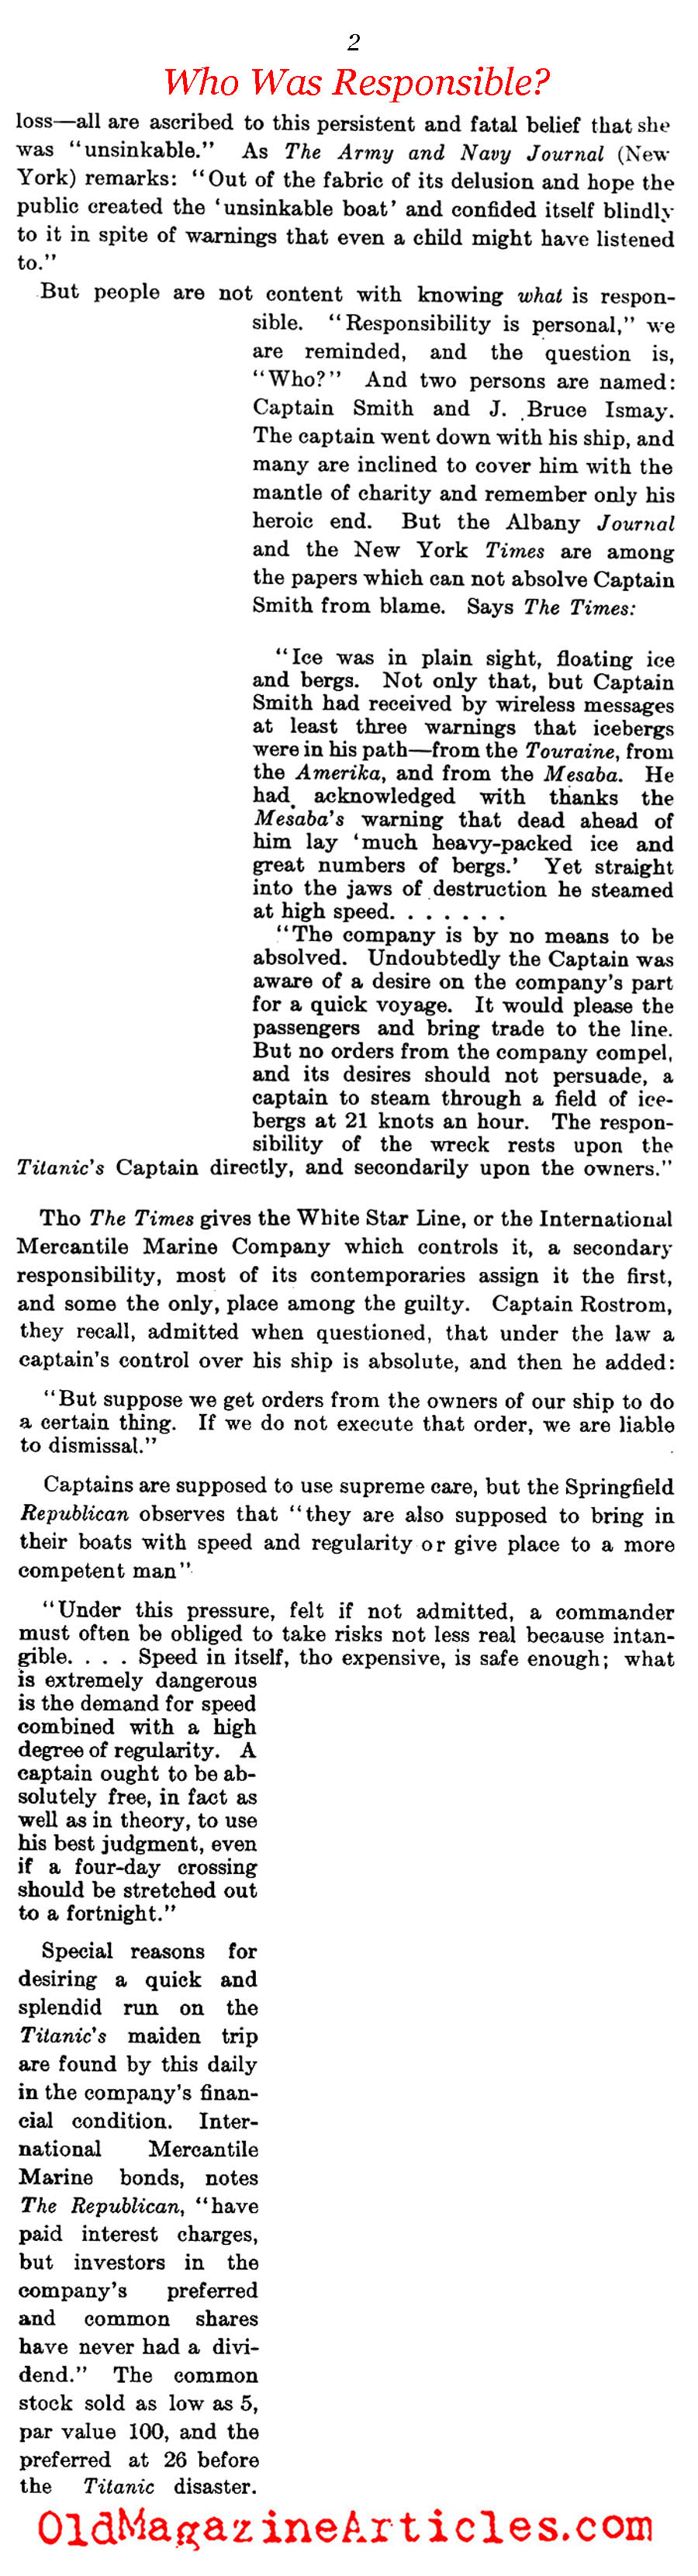 Responsibility for the <em>Titanic</em> Disaster  (The Literary Digest, 1912)